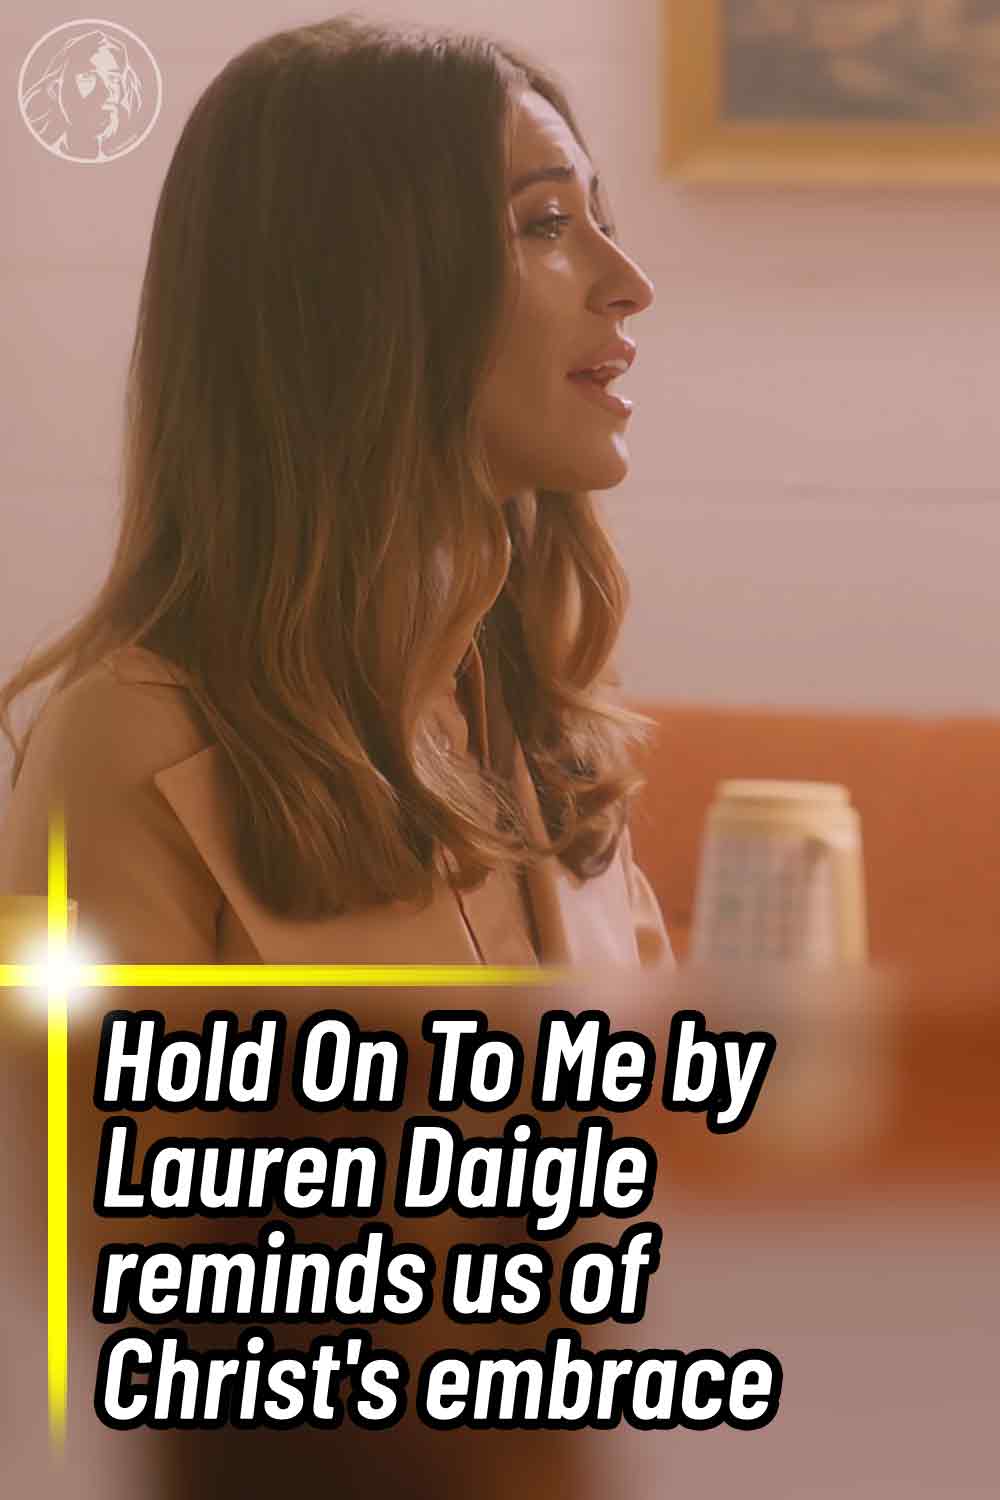 Hold On To Me by Lauren Daigle reminds us of Christ\'s embrace